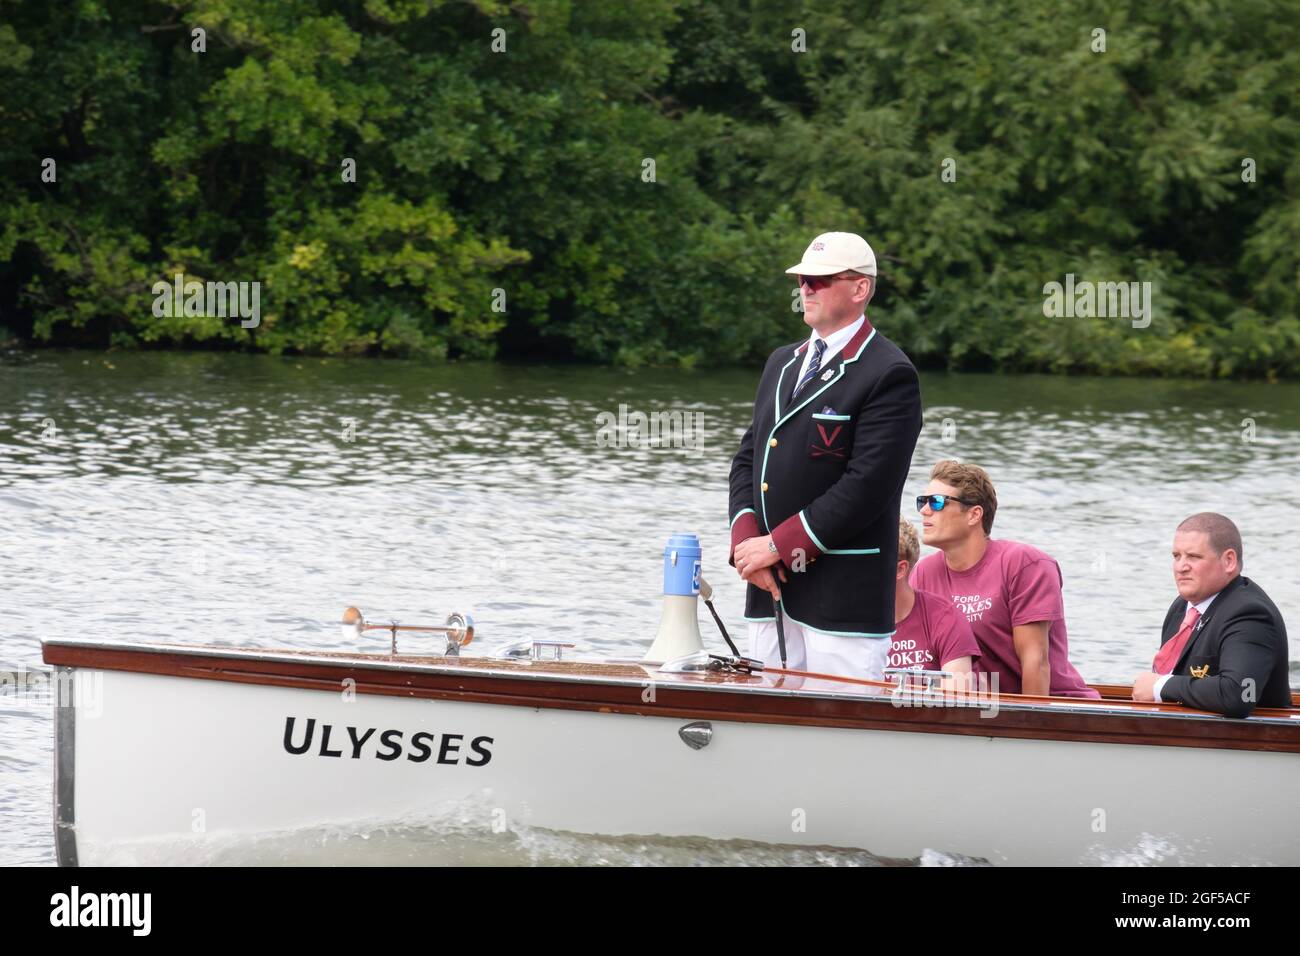 Sir Matthew Pinsent acts as the Umpire on the launch Ulysses at Henley Royal Regatta 2021 on the River Thames at Henley-on-Thames Stock Photo